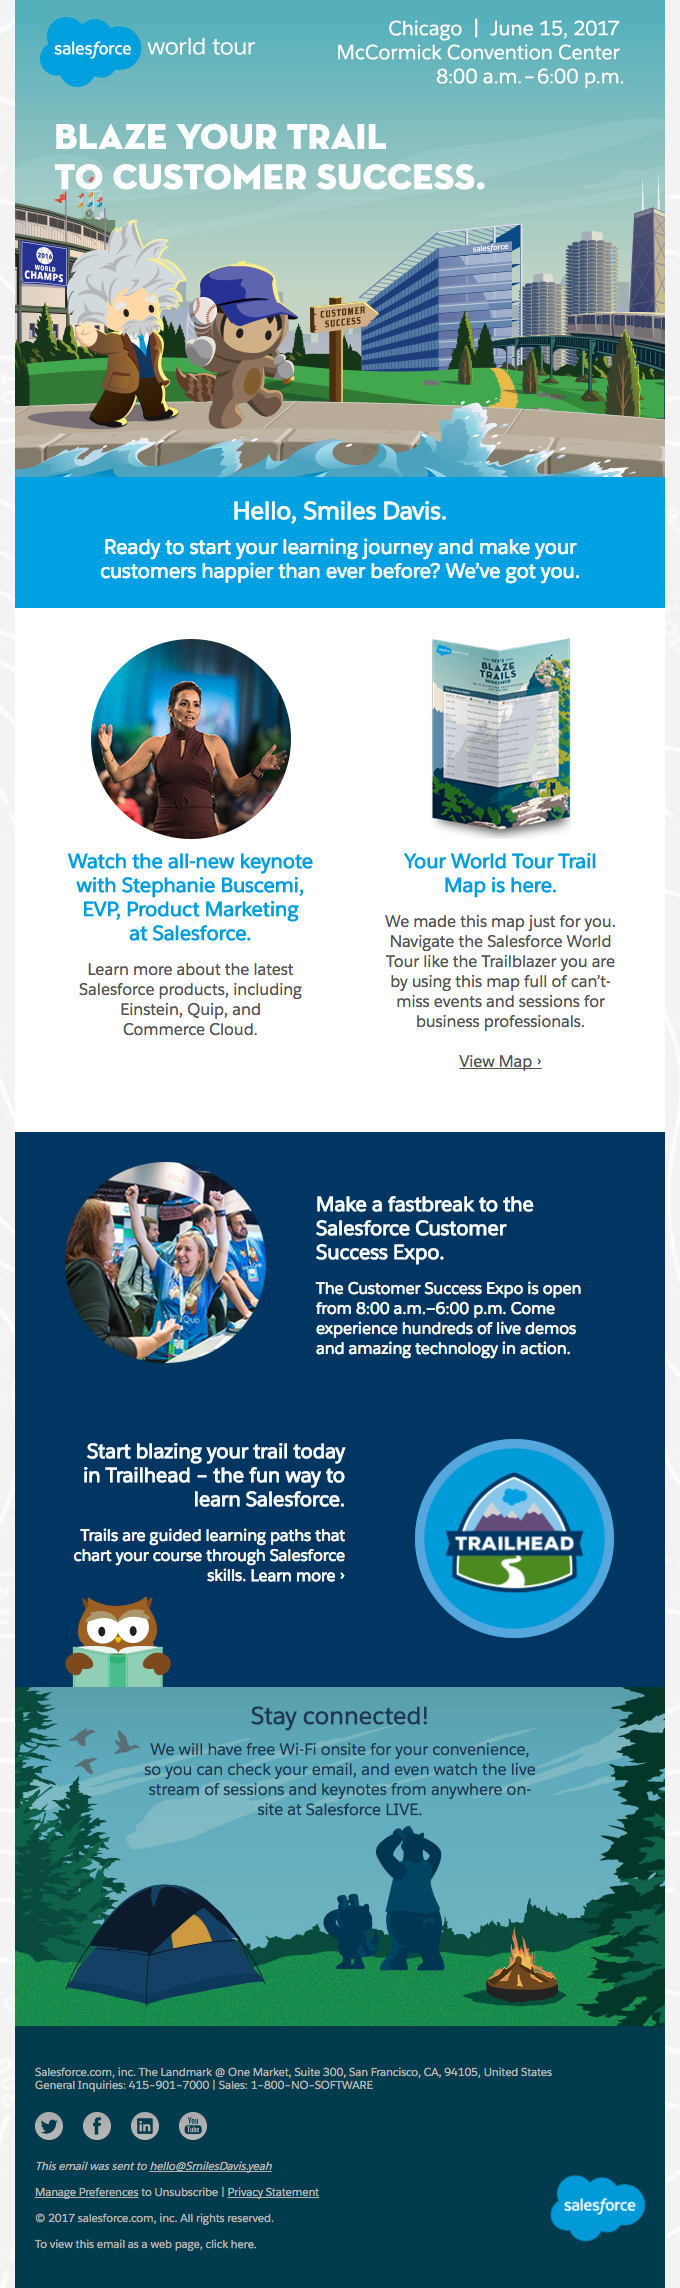 Get ready for the Salesforce World Tour in Chicago from Salesforce